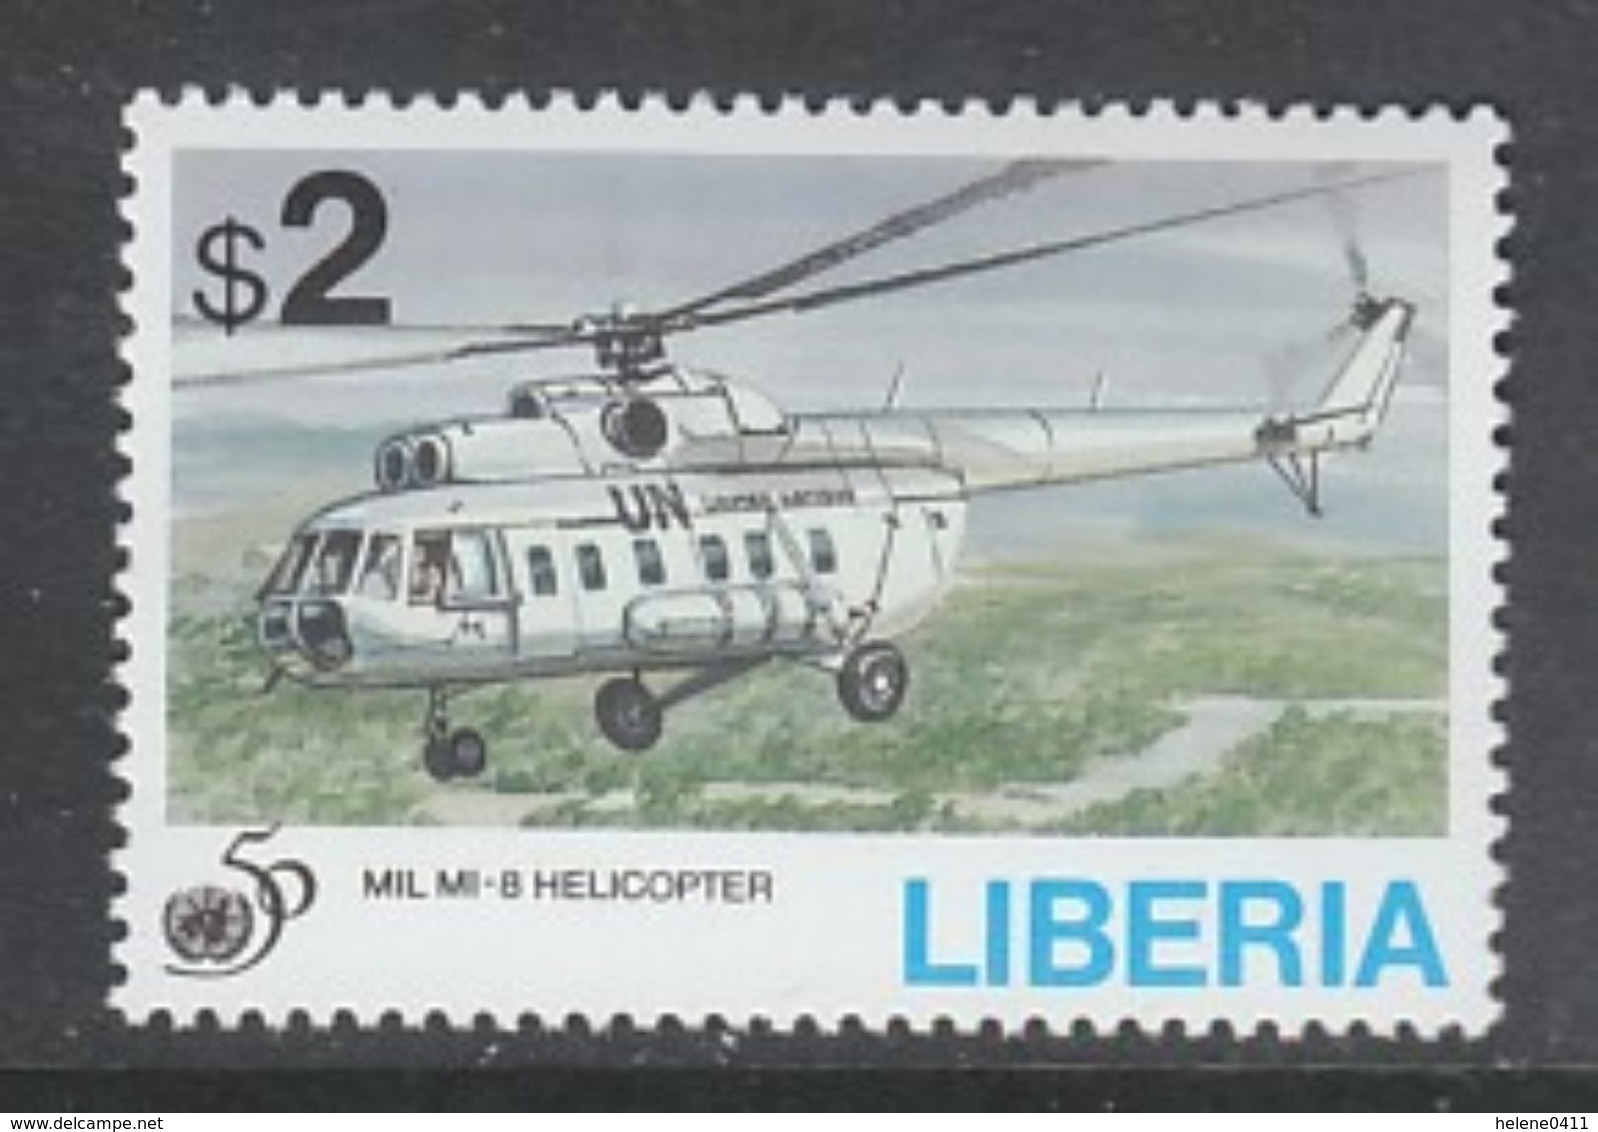 TIMBRE NEUF DU LIBERIA - HELICOPTERE MIL MI-8 (50E ANNIVERSAIRE DES NATIONS UNIES) N° Y&T 1298 - Helikopters